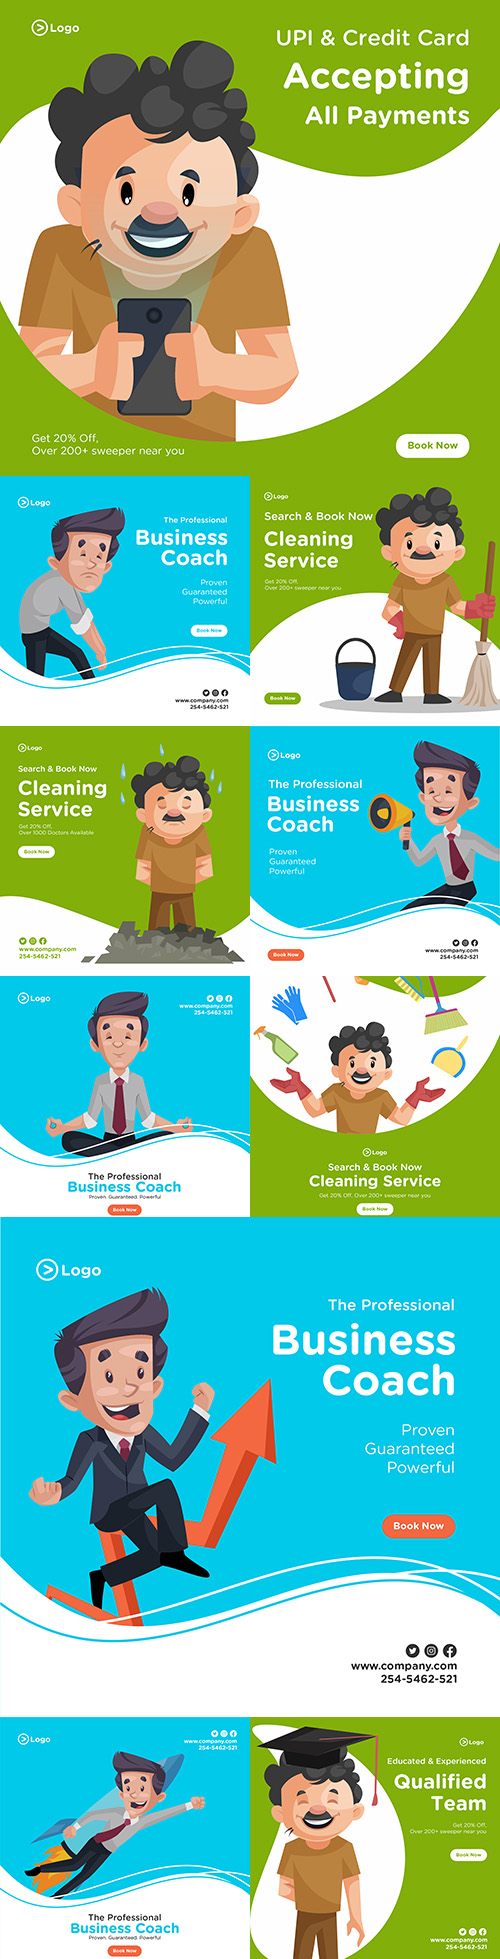 Cleaning banner design with cleaning equipment and businessman
